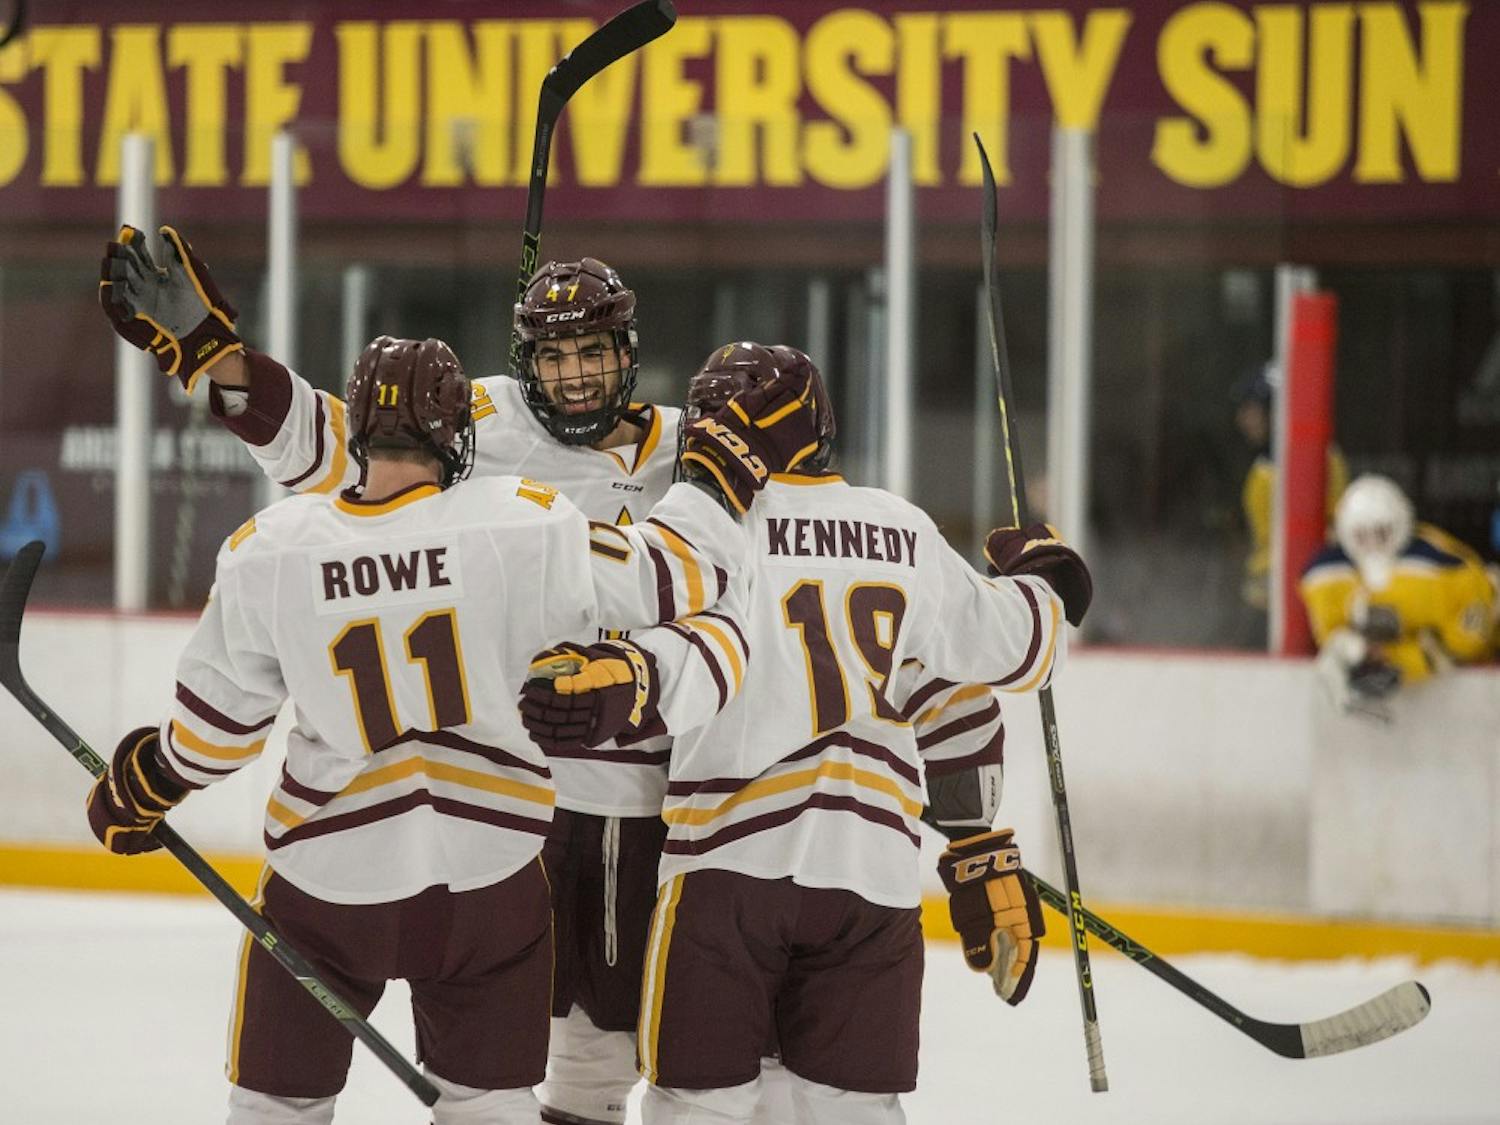 Left wing Jack Rowe, left, and center Matt Kennedy, right, celebrate a goal by defender Nicholas Gushue, center, during a game at the Oceanside Ice Arena in Tempe, Ariz. The Sun Devils lead Southern New Hampshire 4-1 after the first period. 